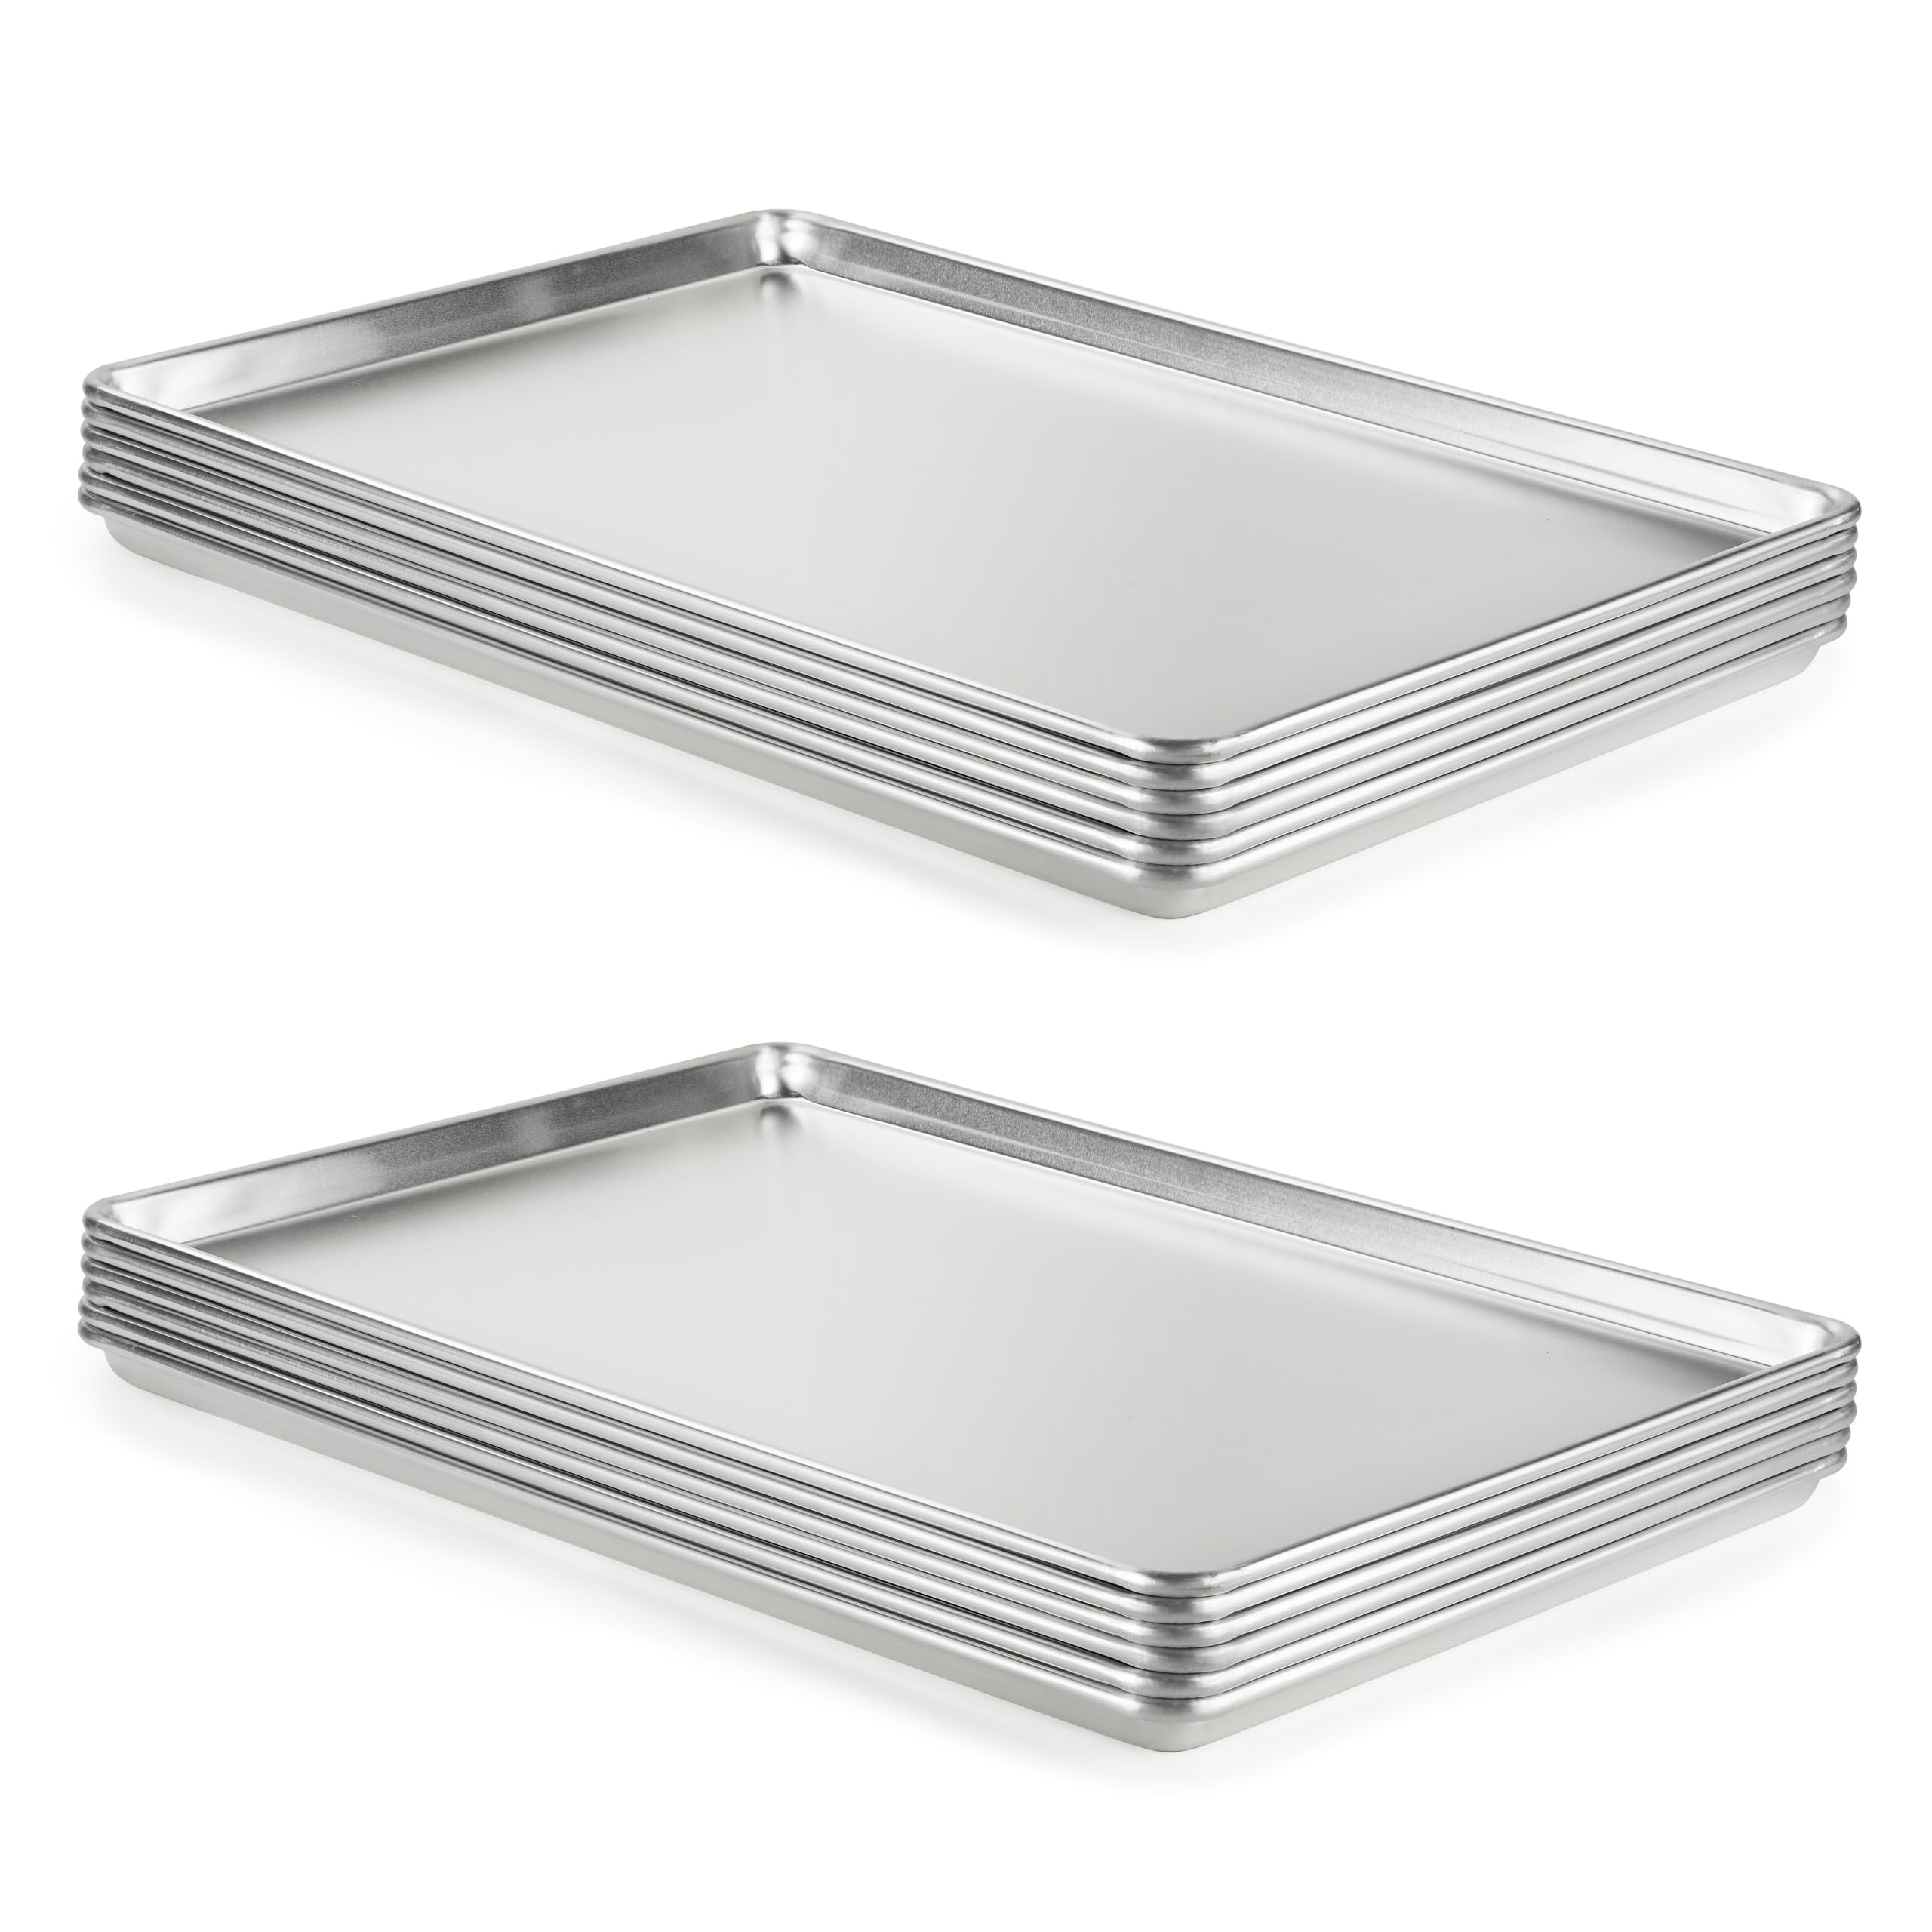 CURTA 12 Pack Aluminum Sheet Pan NSF Listed Full Size 26 x 18 inch Commercial Bakery Cake Bun Pan Baking Tray